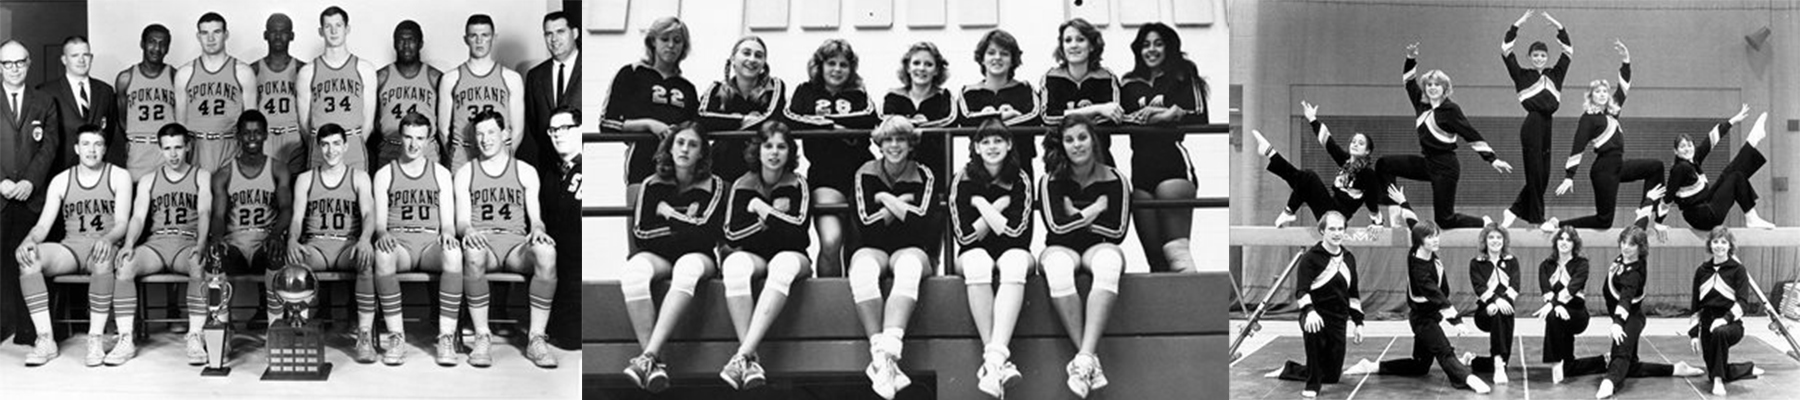 Black and white hall of fame team photos